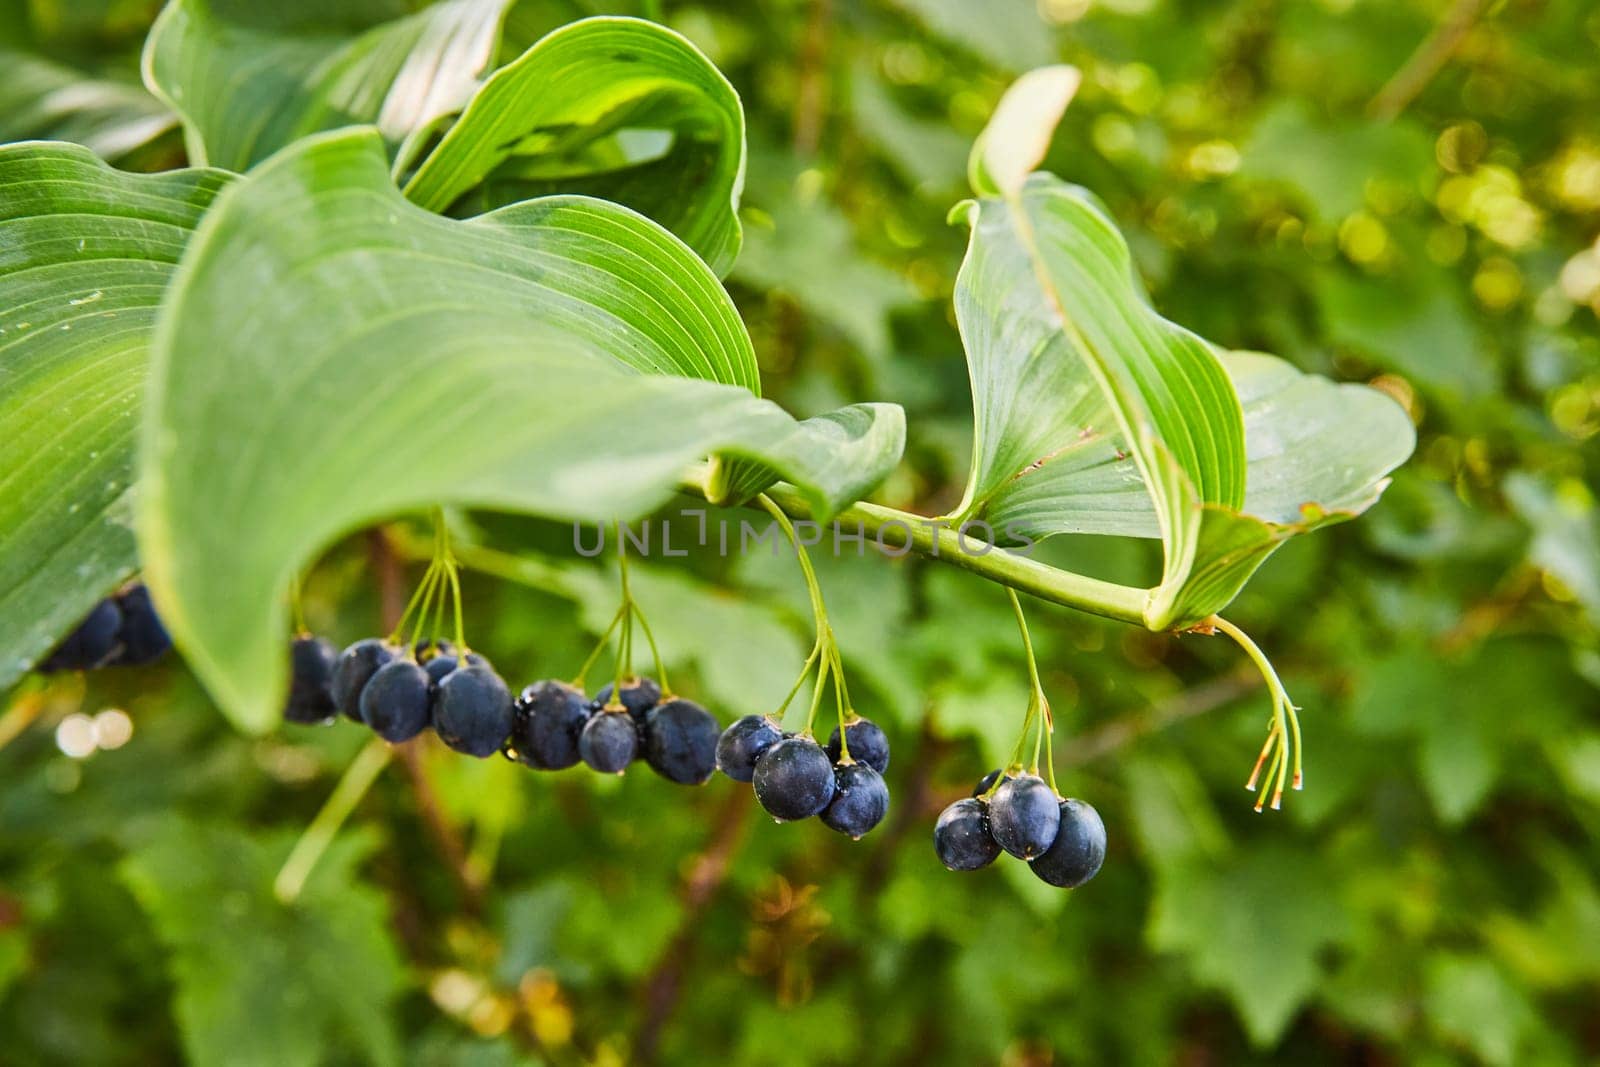 Luscious Blueberries and Green Leaves in Natural Light by njproductions